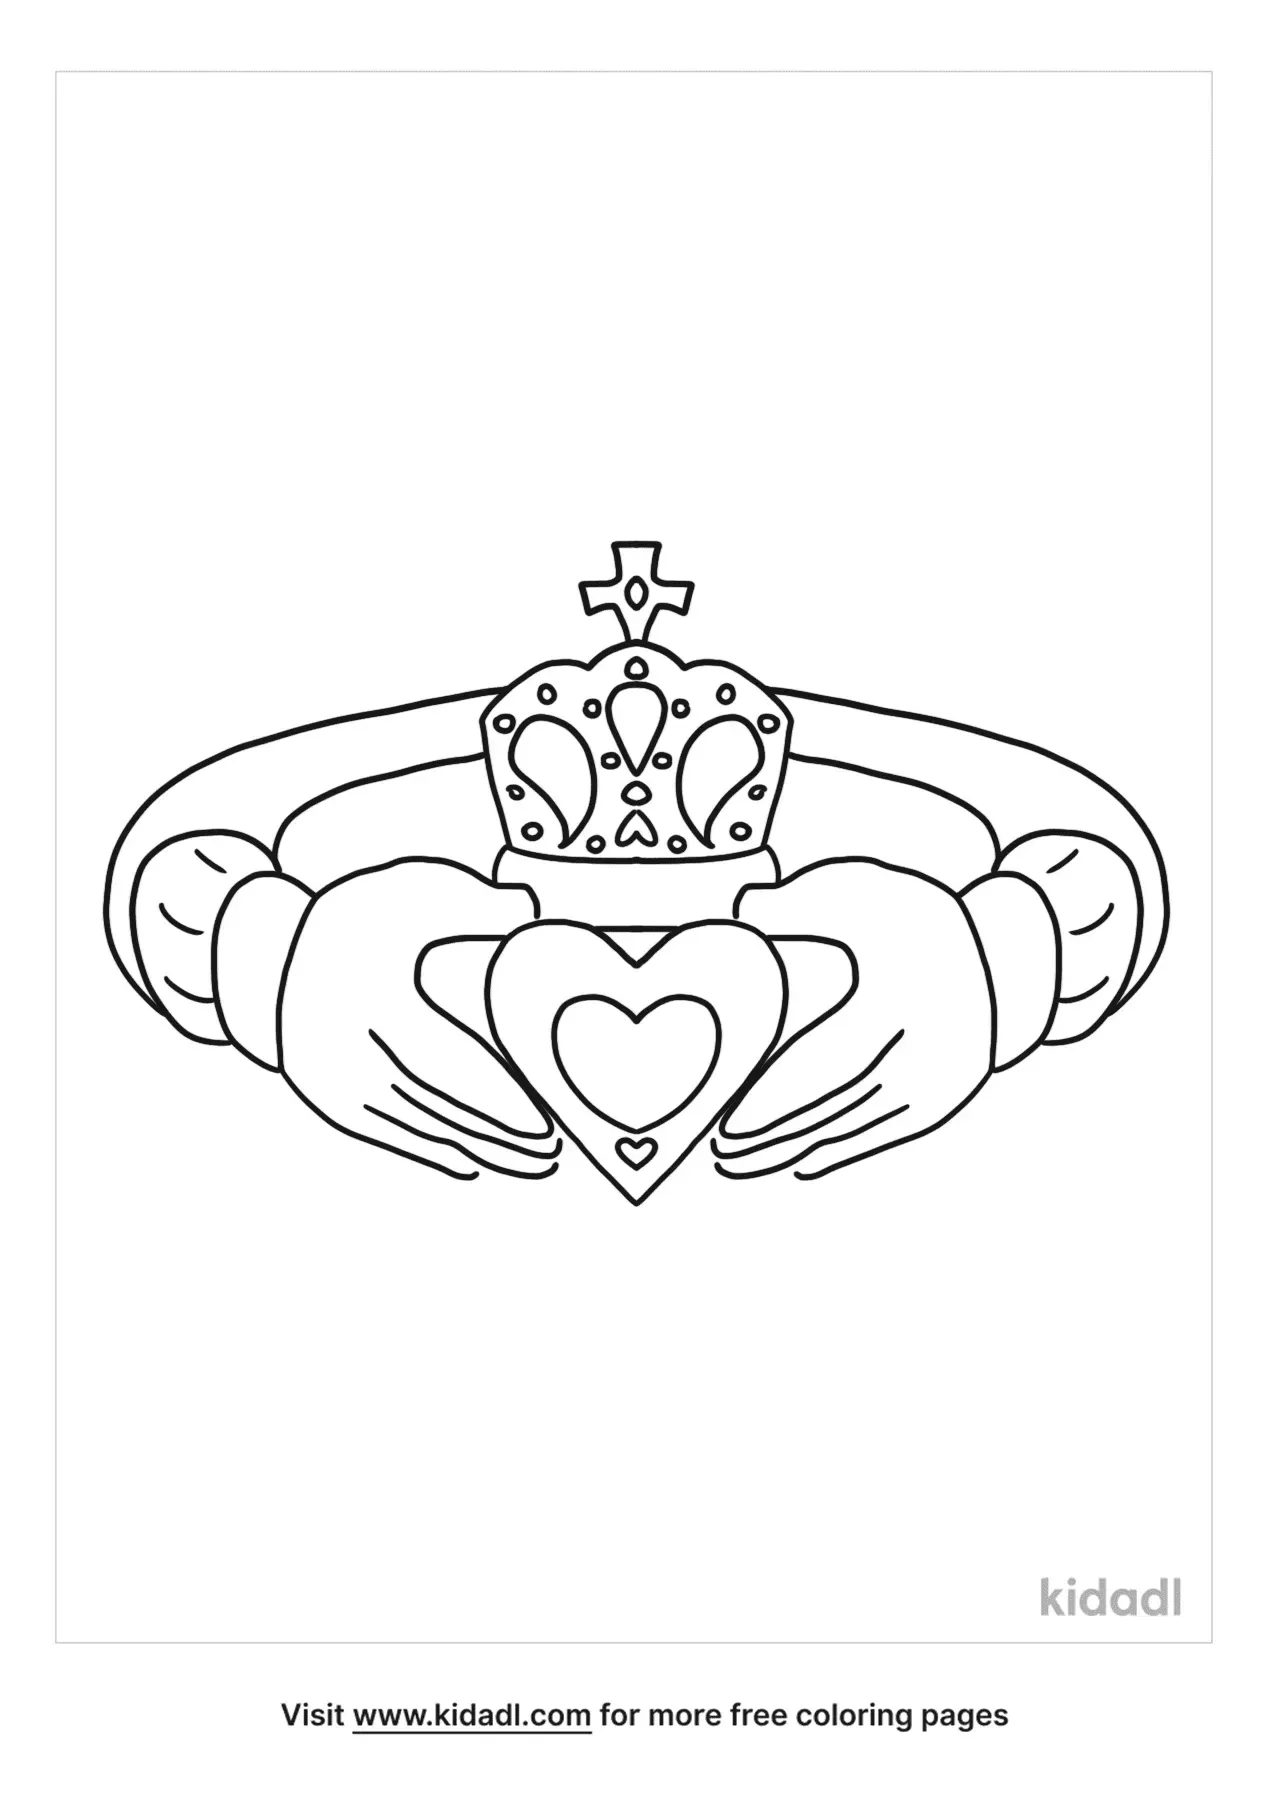 Ring Coloring Pages to download and print for free